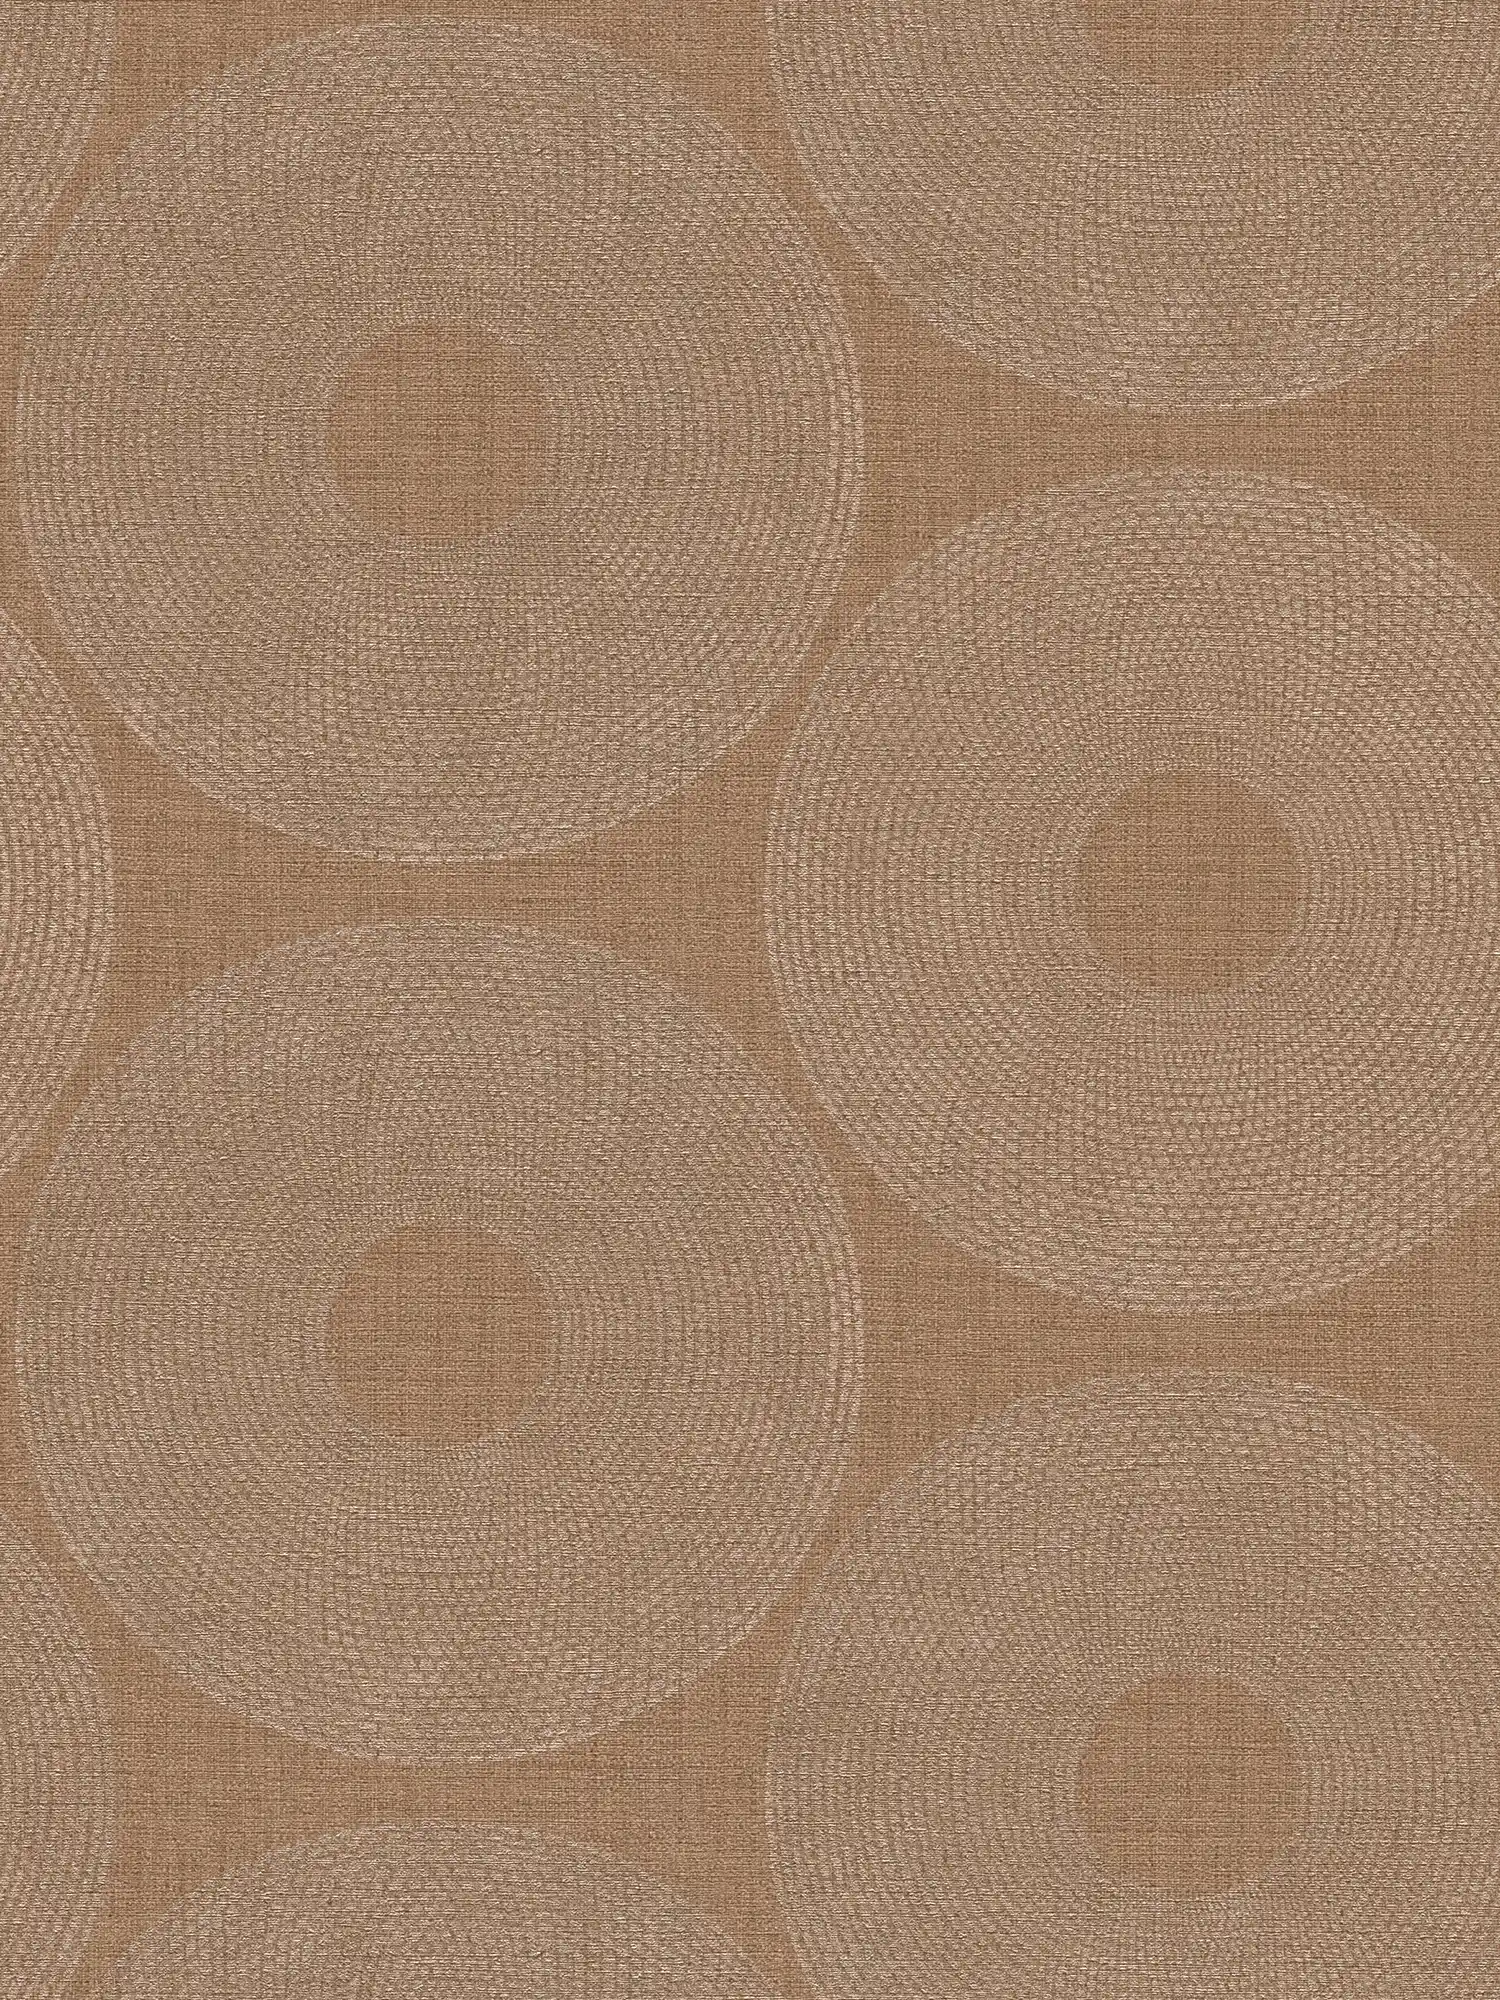         Metallic wallpaper circles with structure design - brown
    